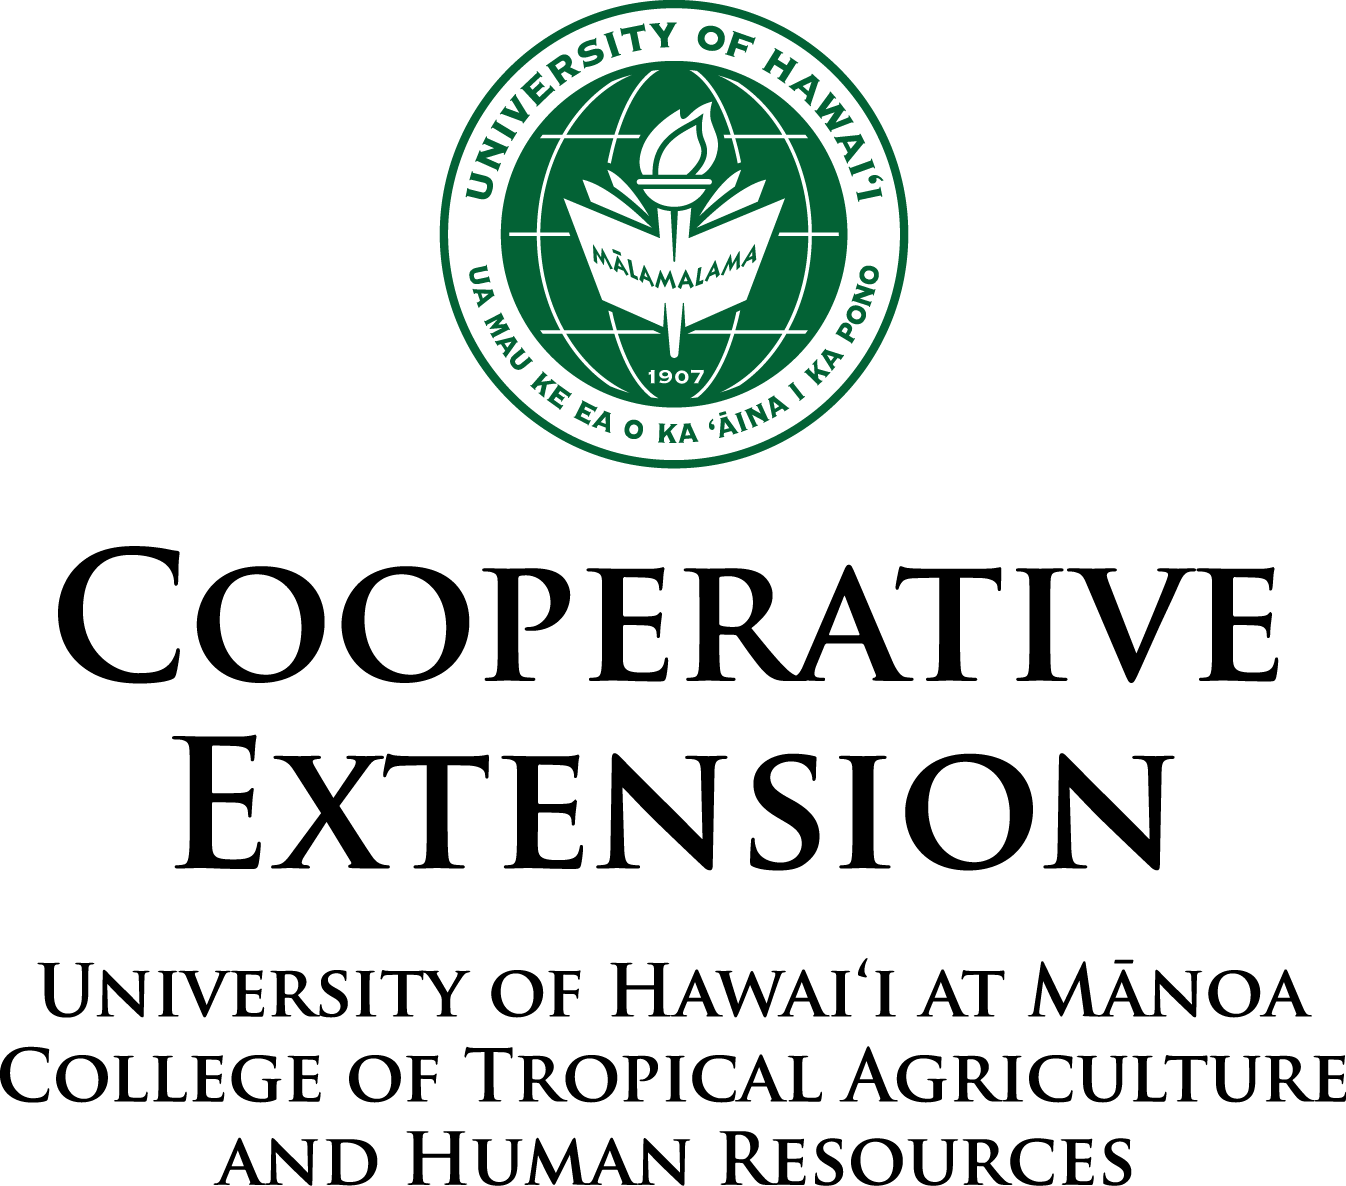 University of Hawaiʻi - Mānoa, College of Tropical Agriculture and Human Resources (CTAHR), Kauaʻi Cooperative Extension